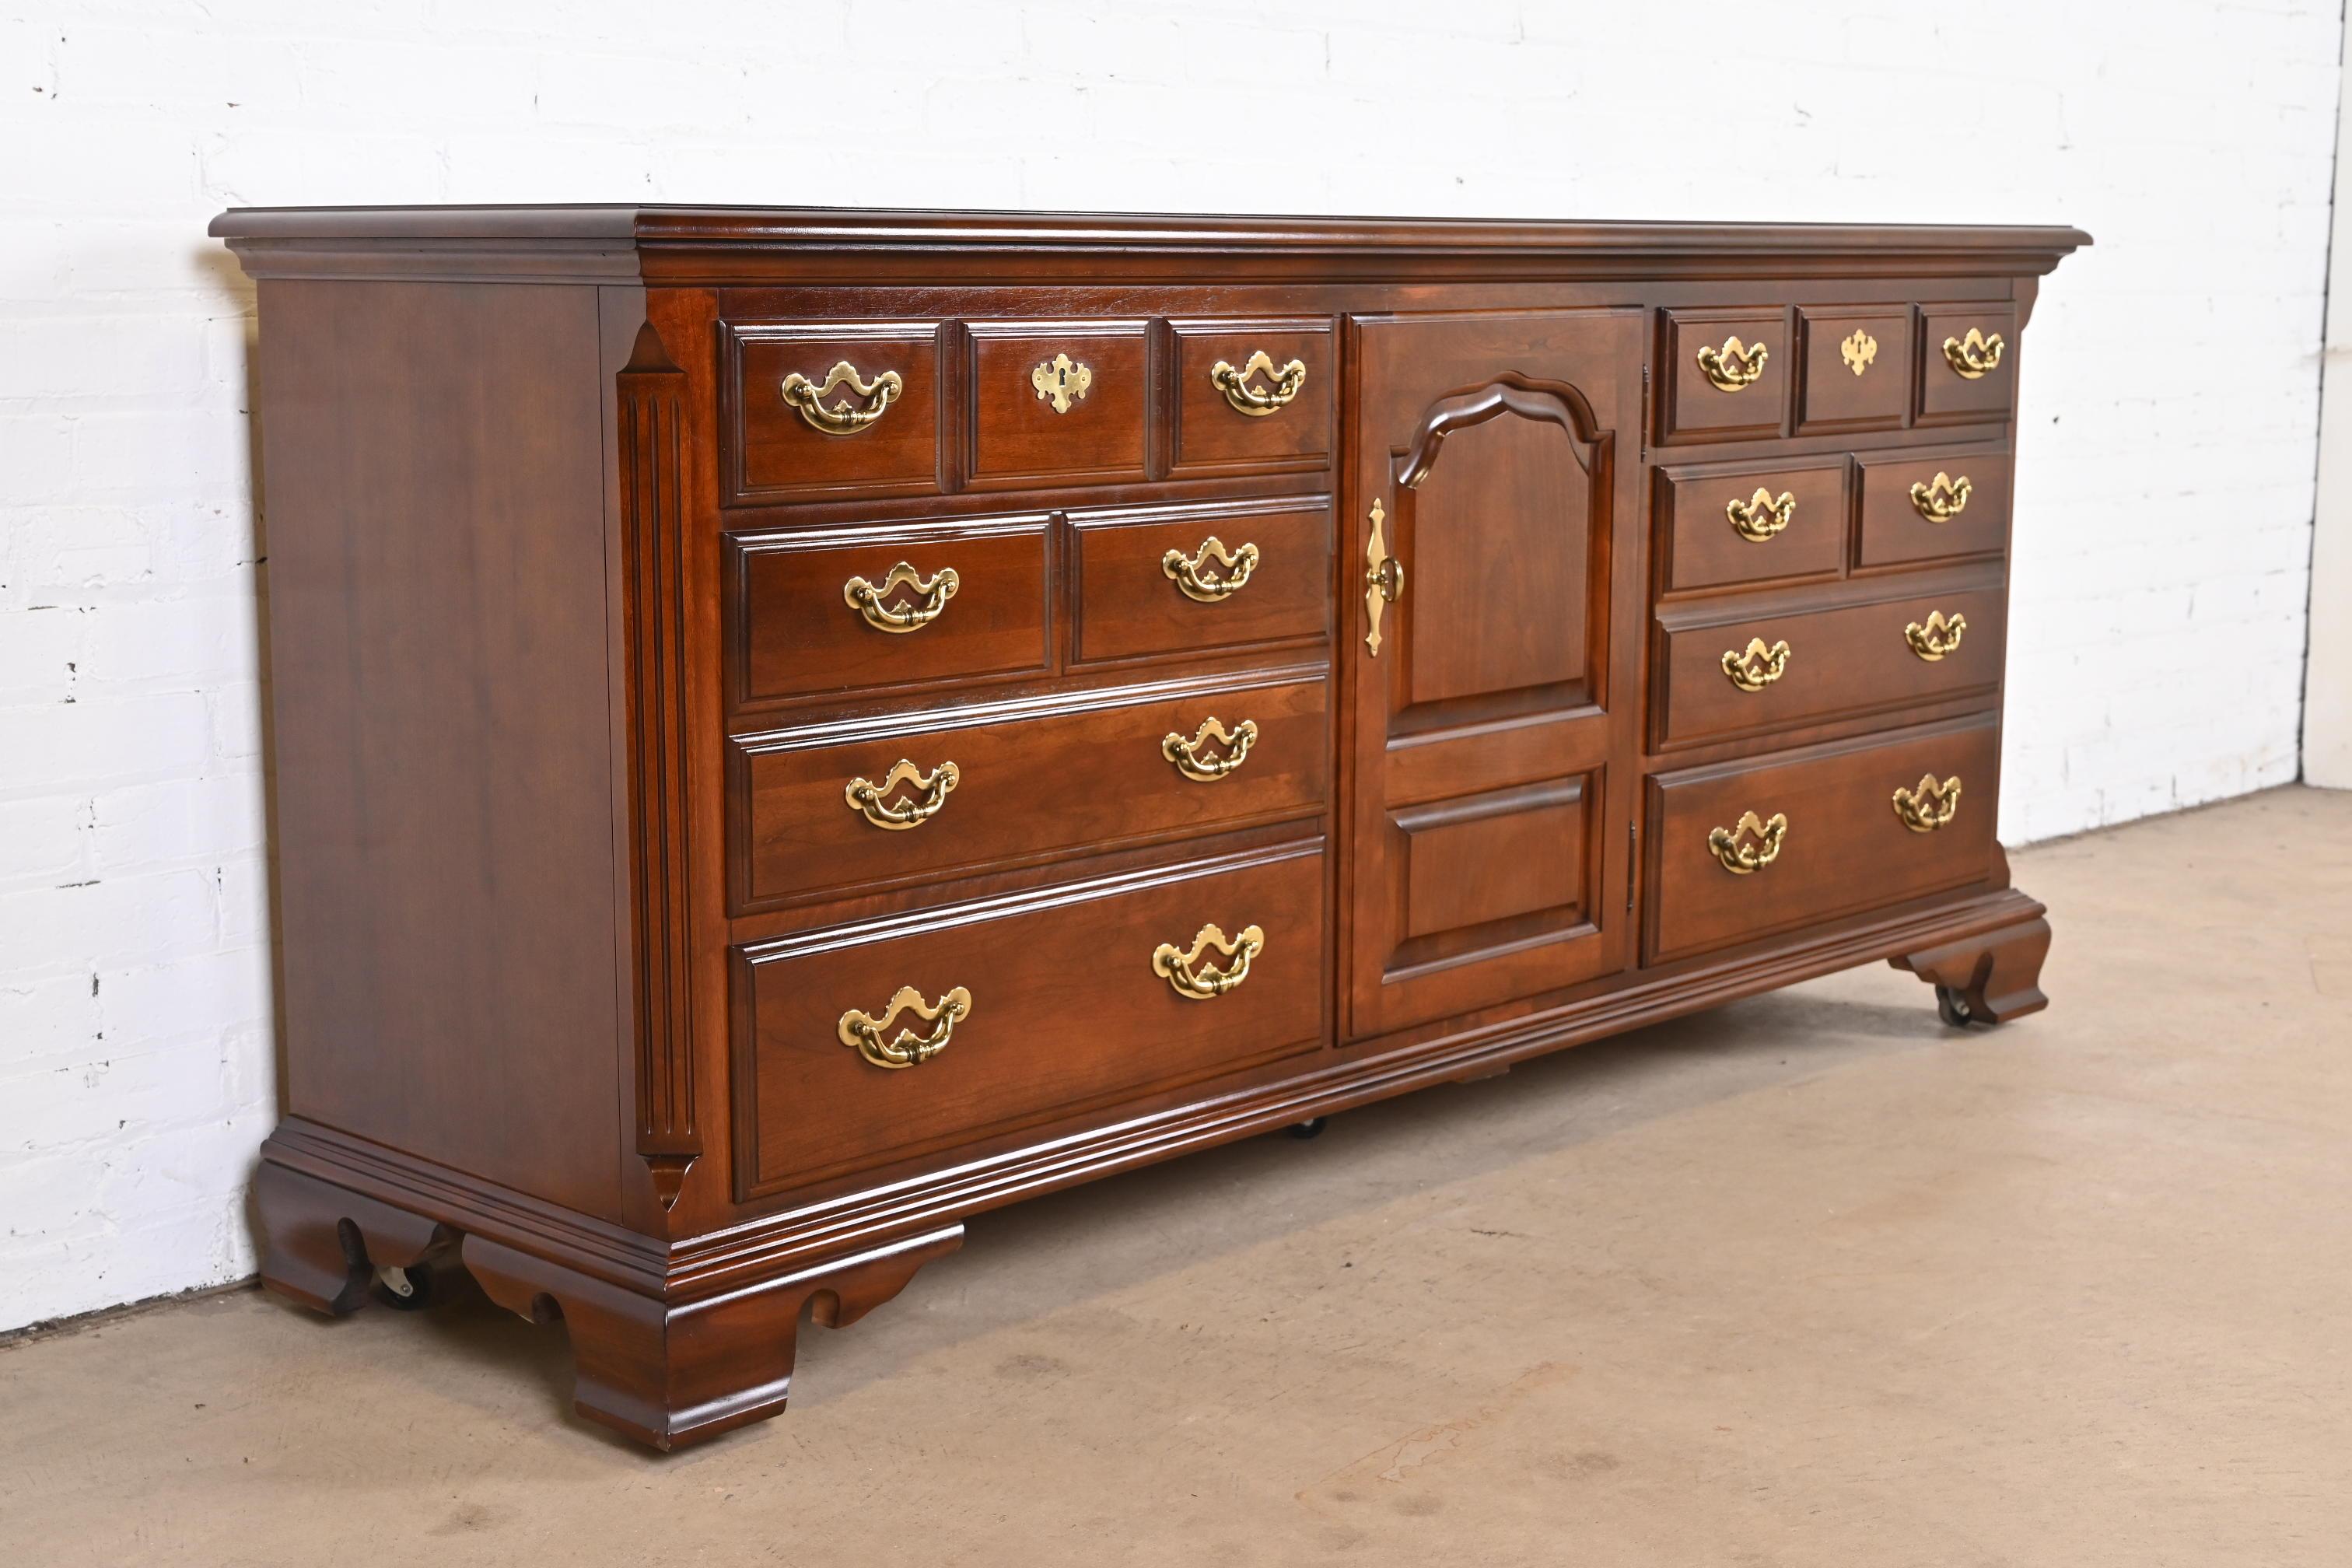 Thomasville Georgian Solid Cherry Wood Dresser or Credenza In Good Condition For Sale In South Bend, IN